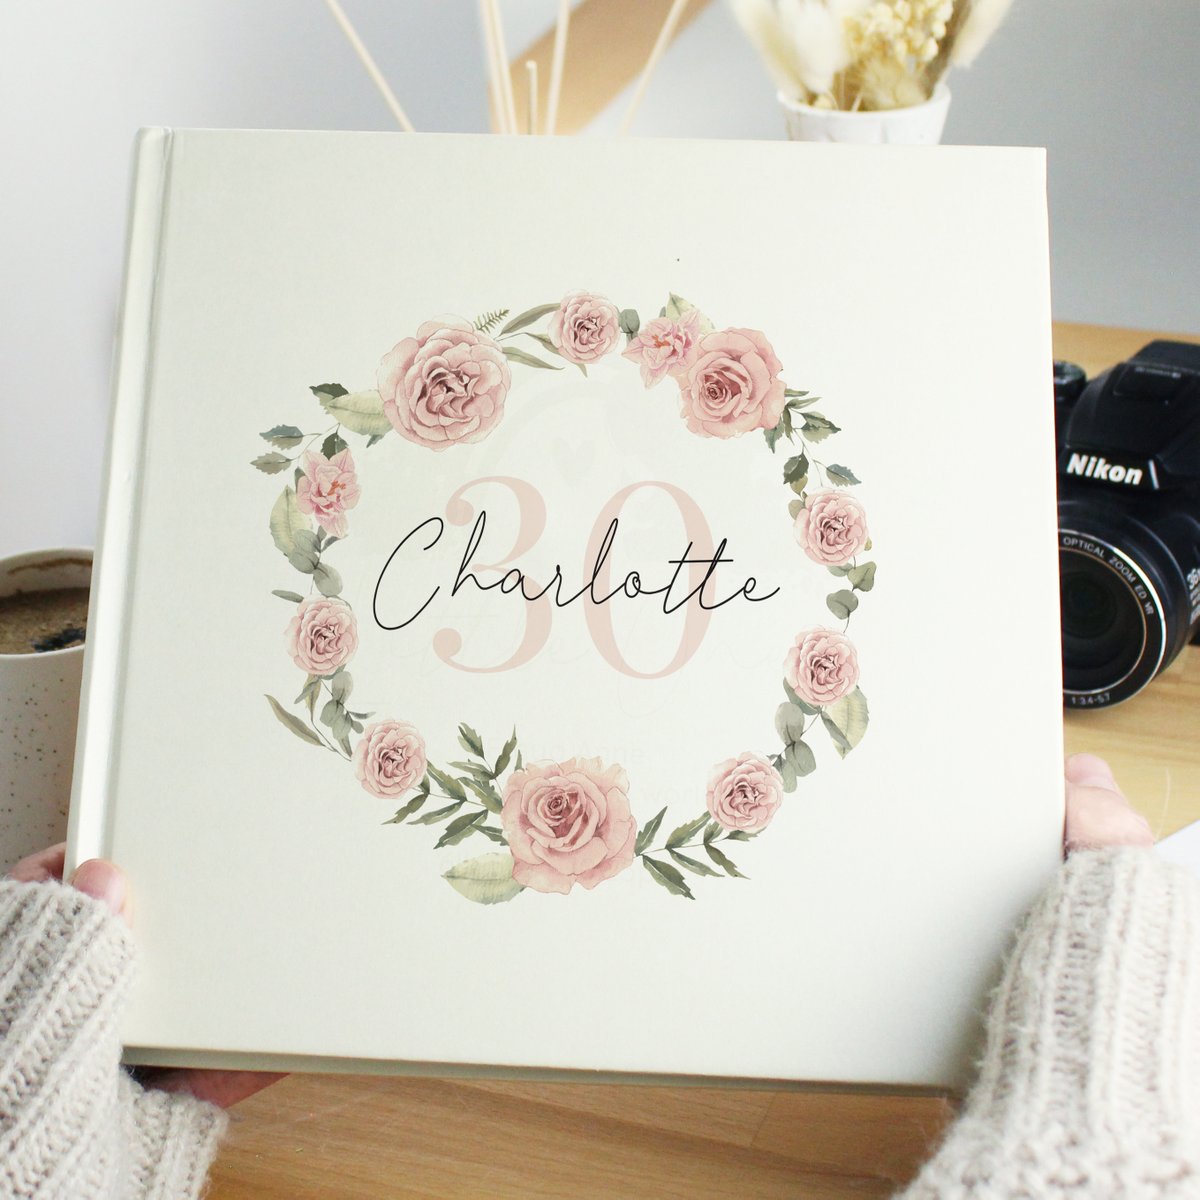 No matter how many candles are on the cake, this photo album can be personalised with any name & any age & will hold 120 6x4 photographs lilyblueuk.co.uk/birthday-gifts…

#birthday #birthdaygifts #photoalbum #personalised #elevenseshour #EarlyBiz